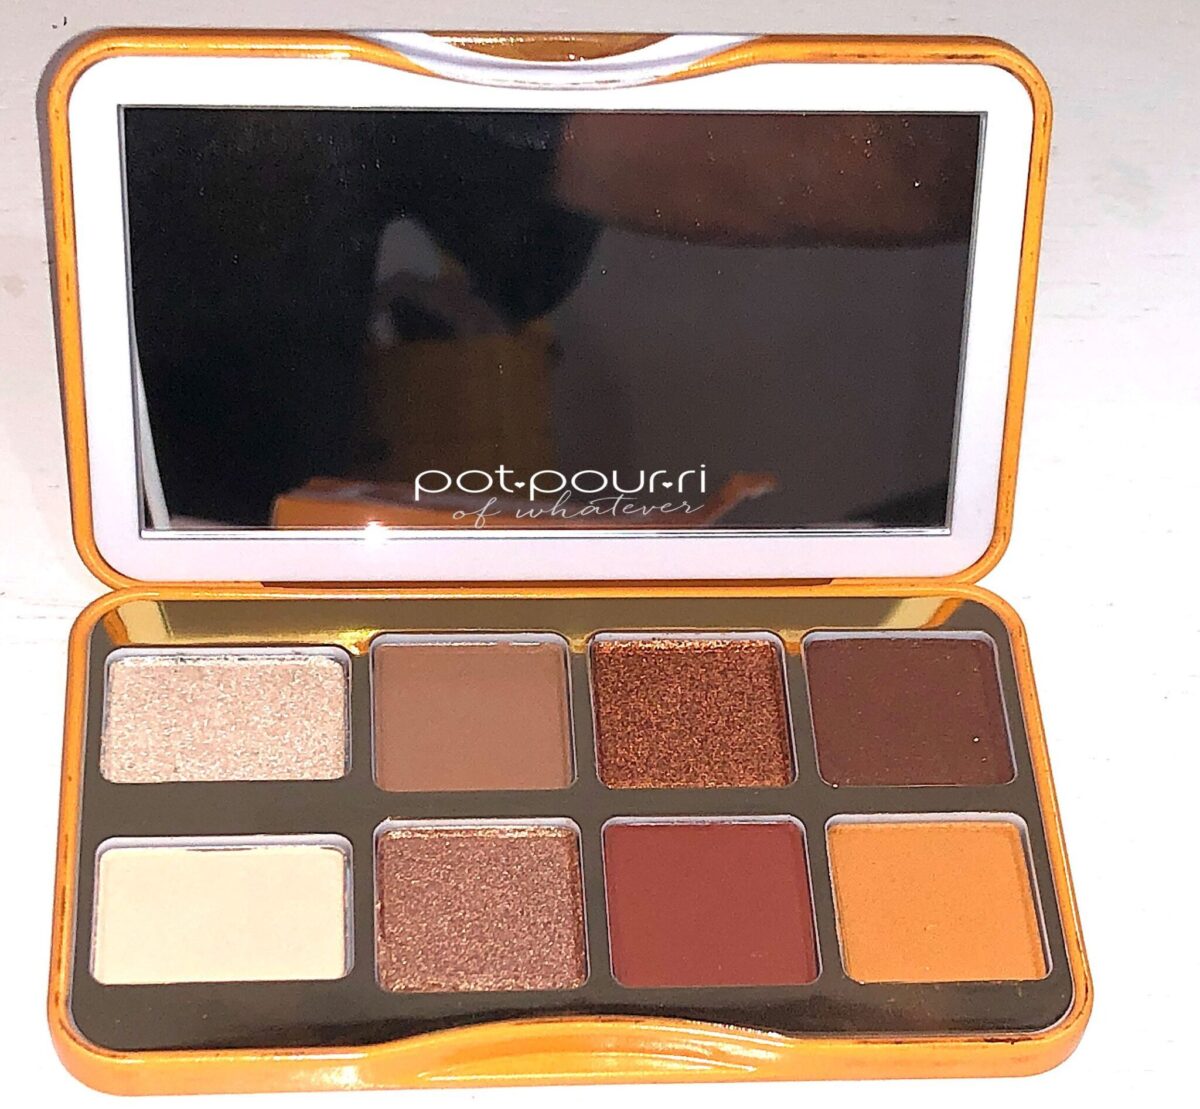 THE HOT BUTTERED RUM PALETTE HAS A MIRROR AND EIGHT EYESHADOWS INSIDE THE COMPACT